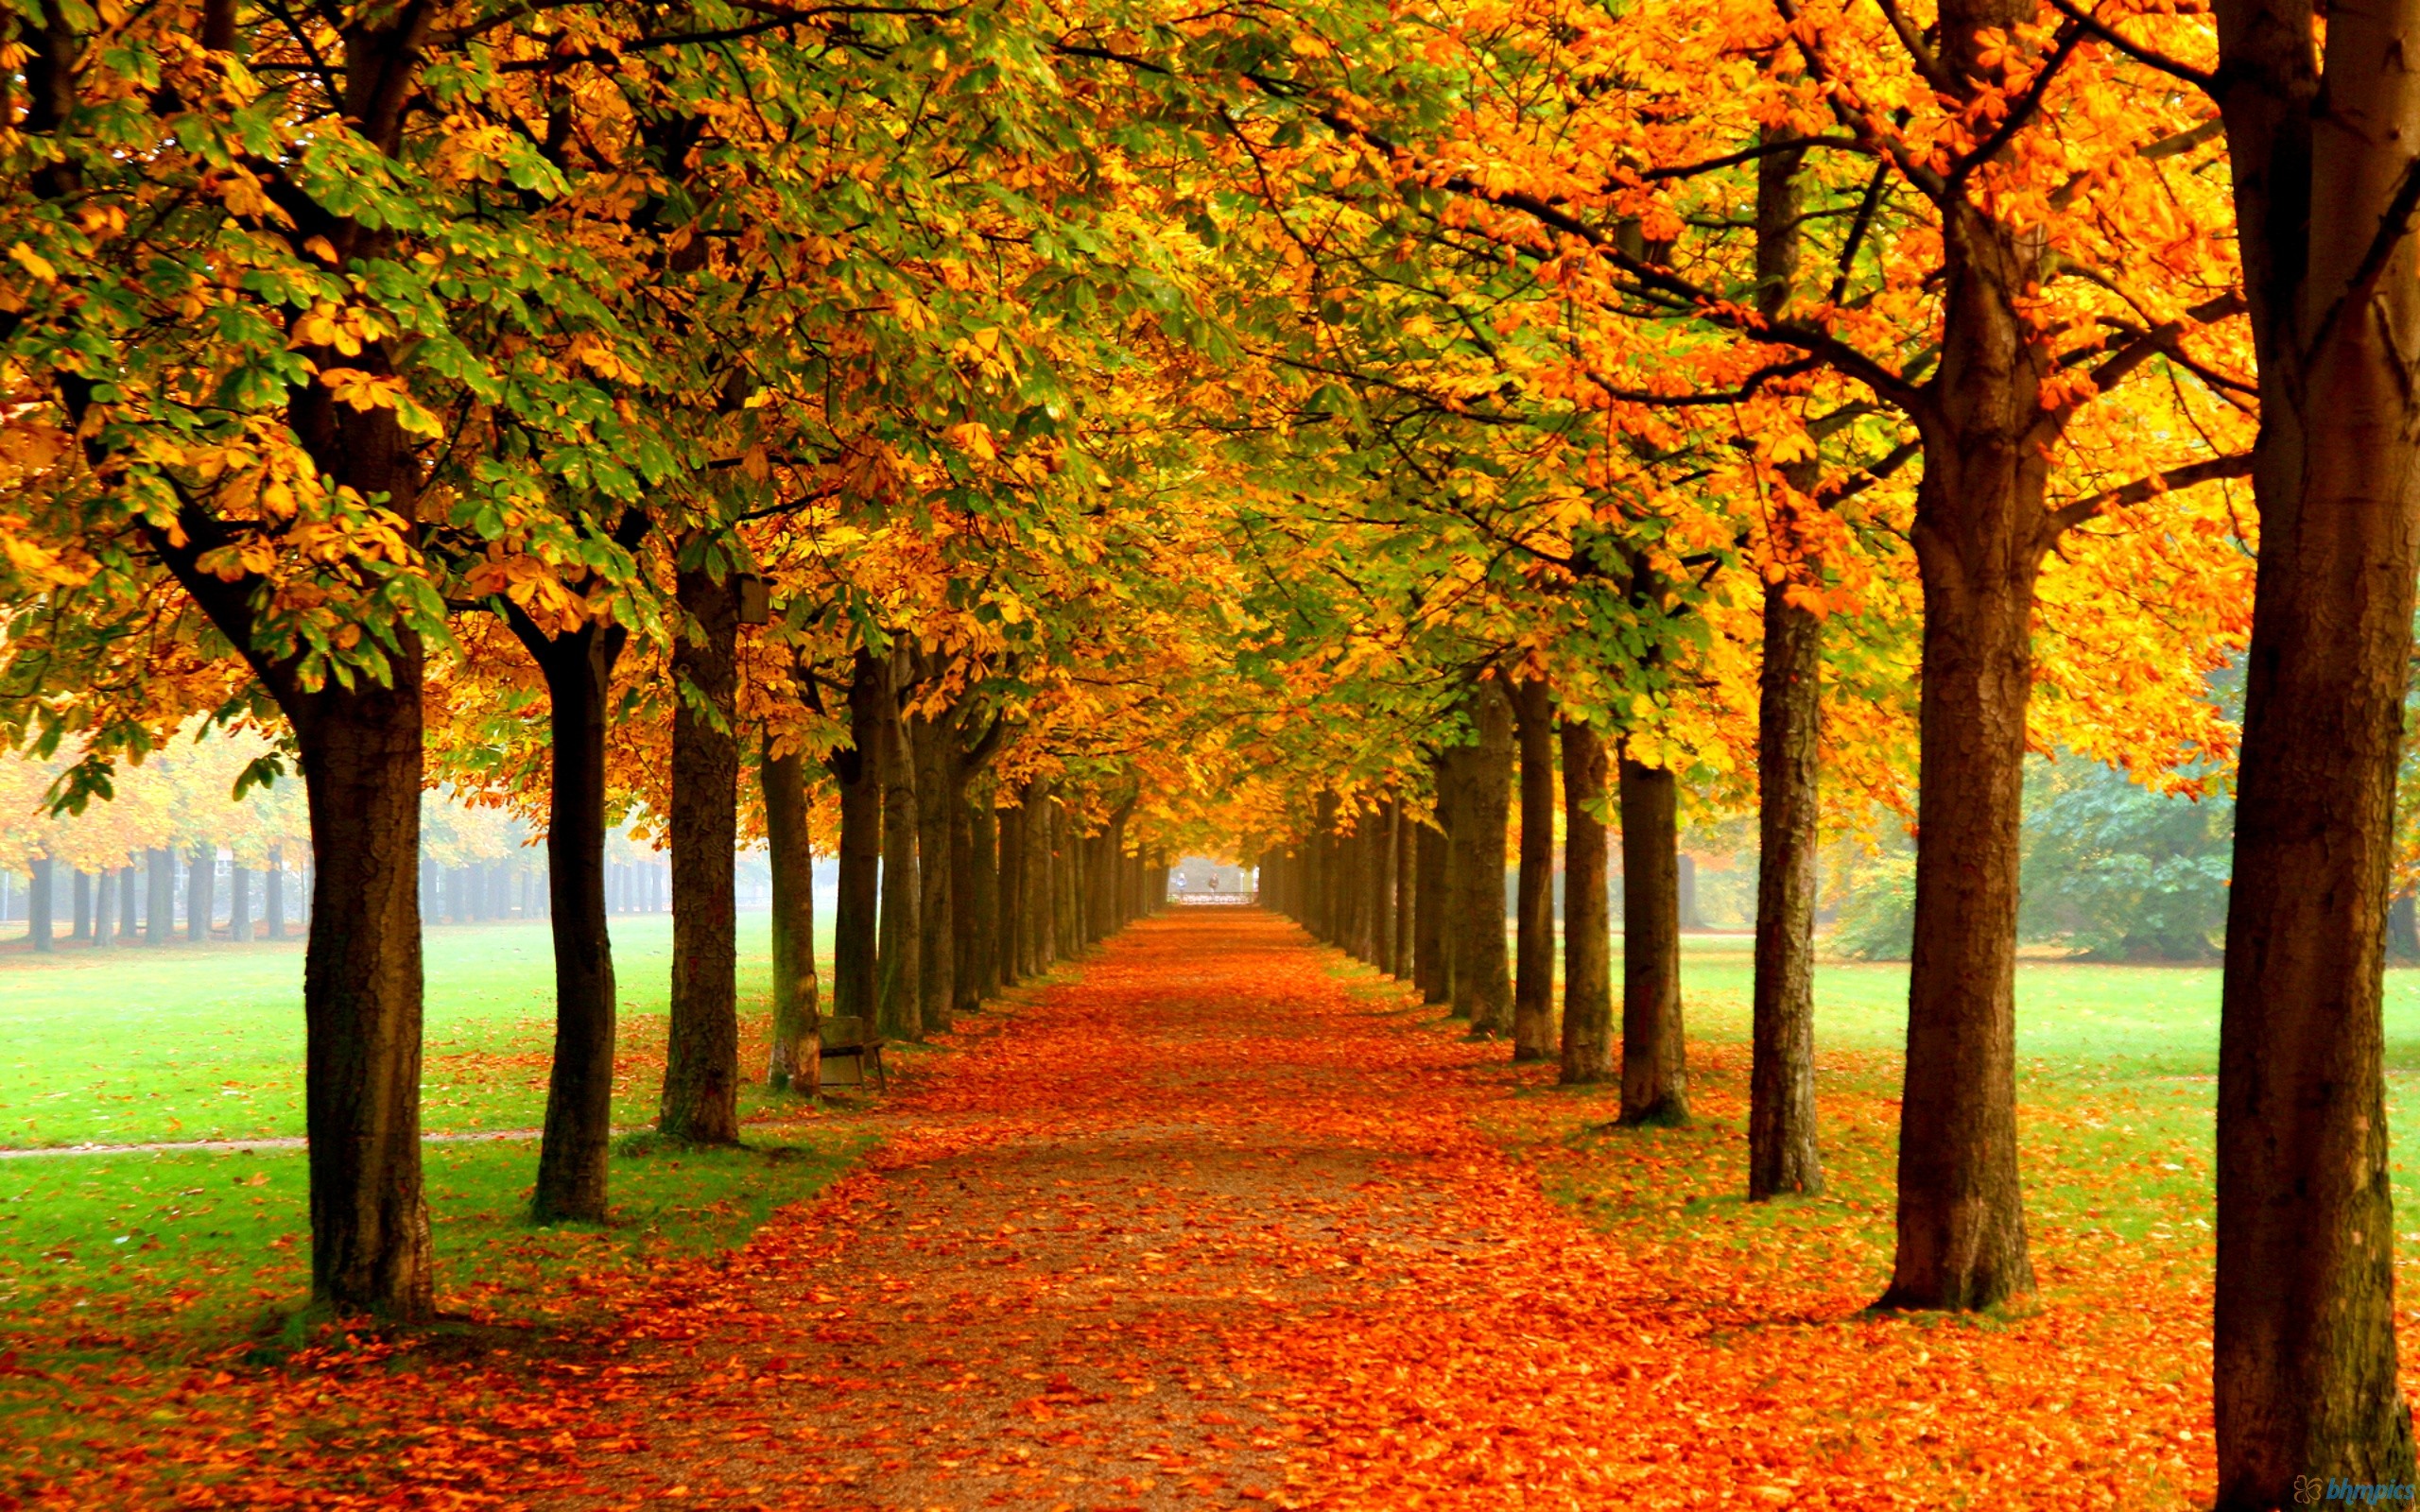 Forests: Park Autumn Leaves Static Red Orange Road Trees Fall Nature ...